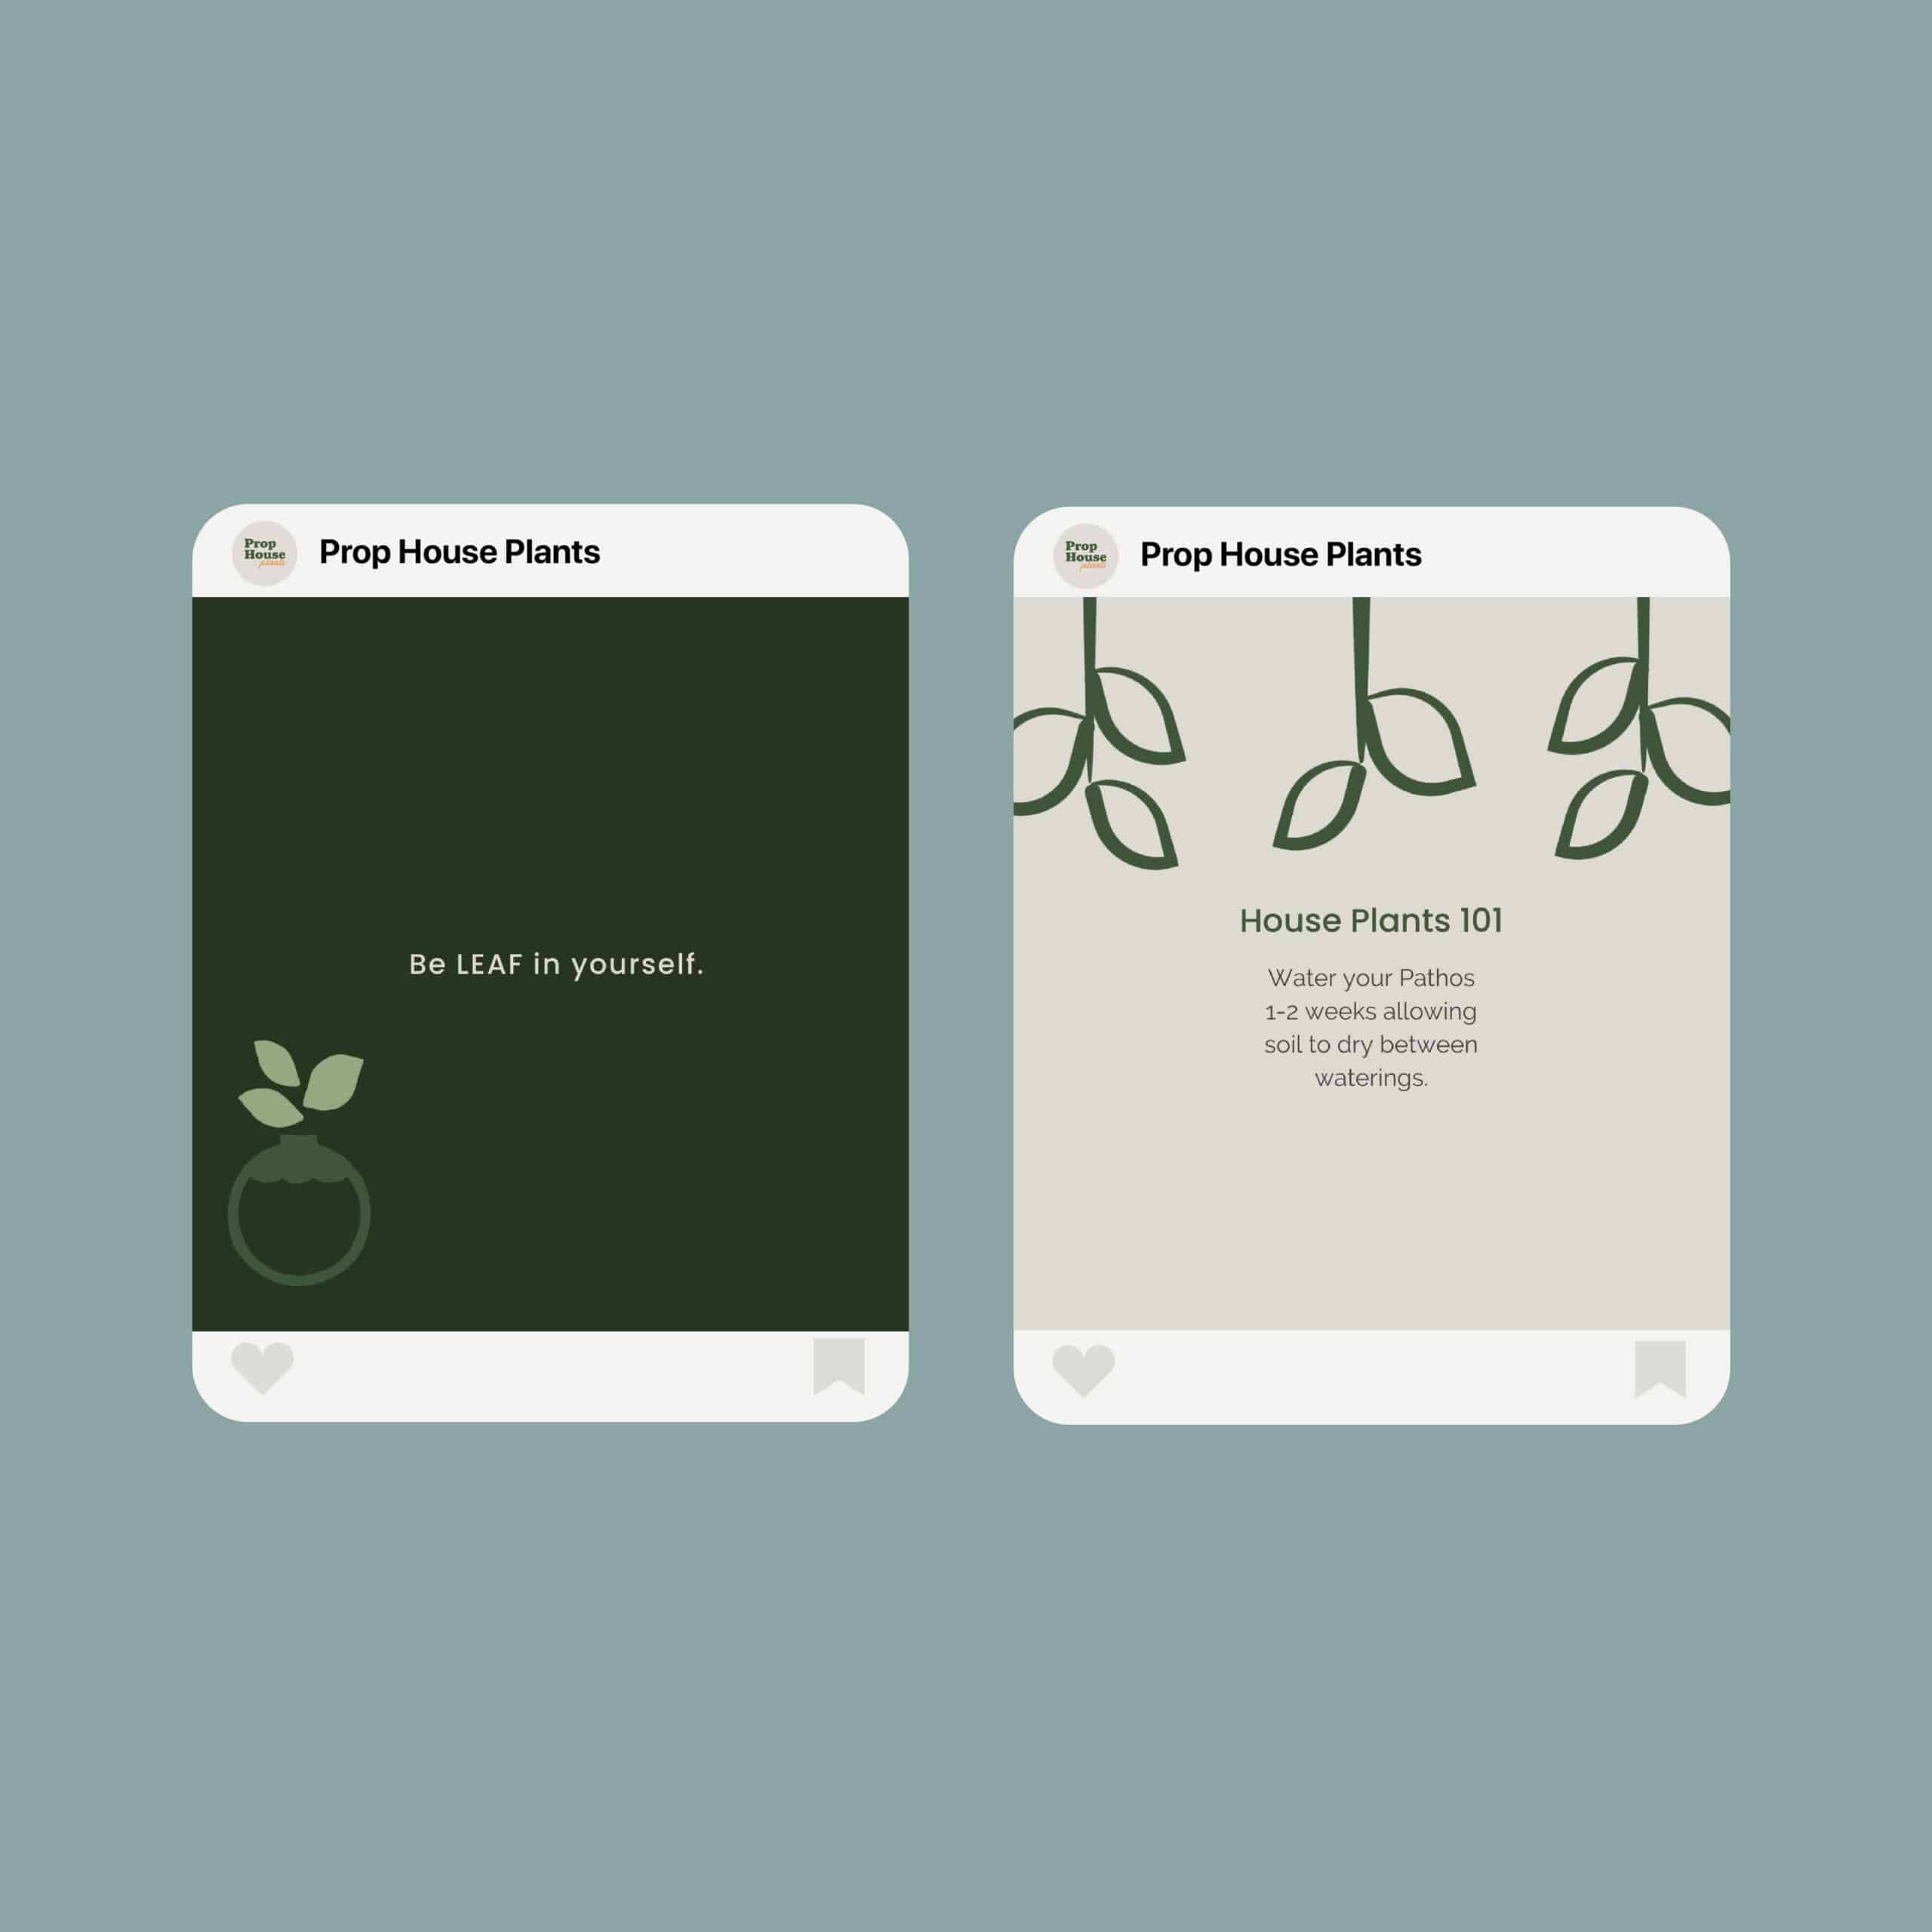 Instagram Templates for Prop House Plants plant shop in San Pedro California by Stellen Design Branding and Logo Design Agency in Los Angeles California